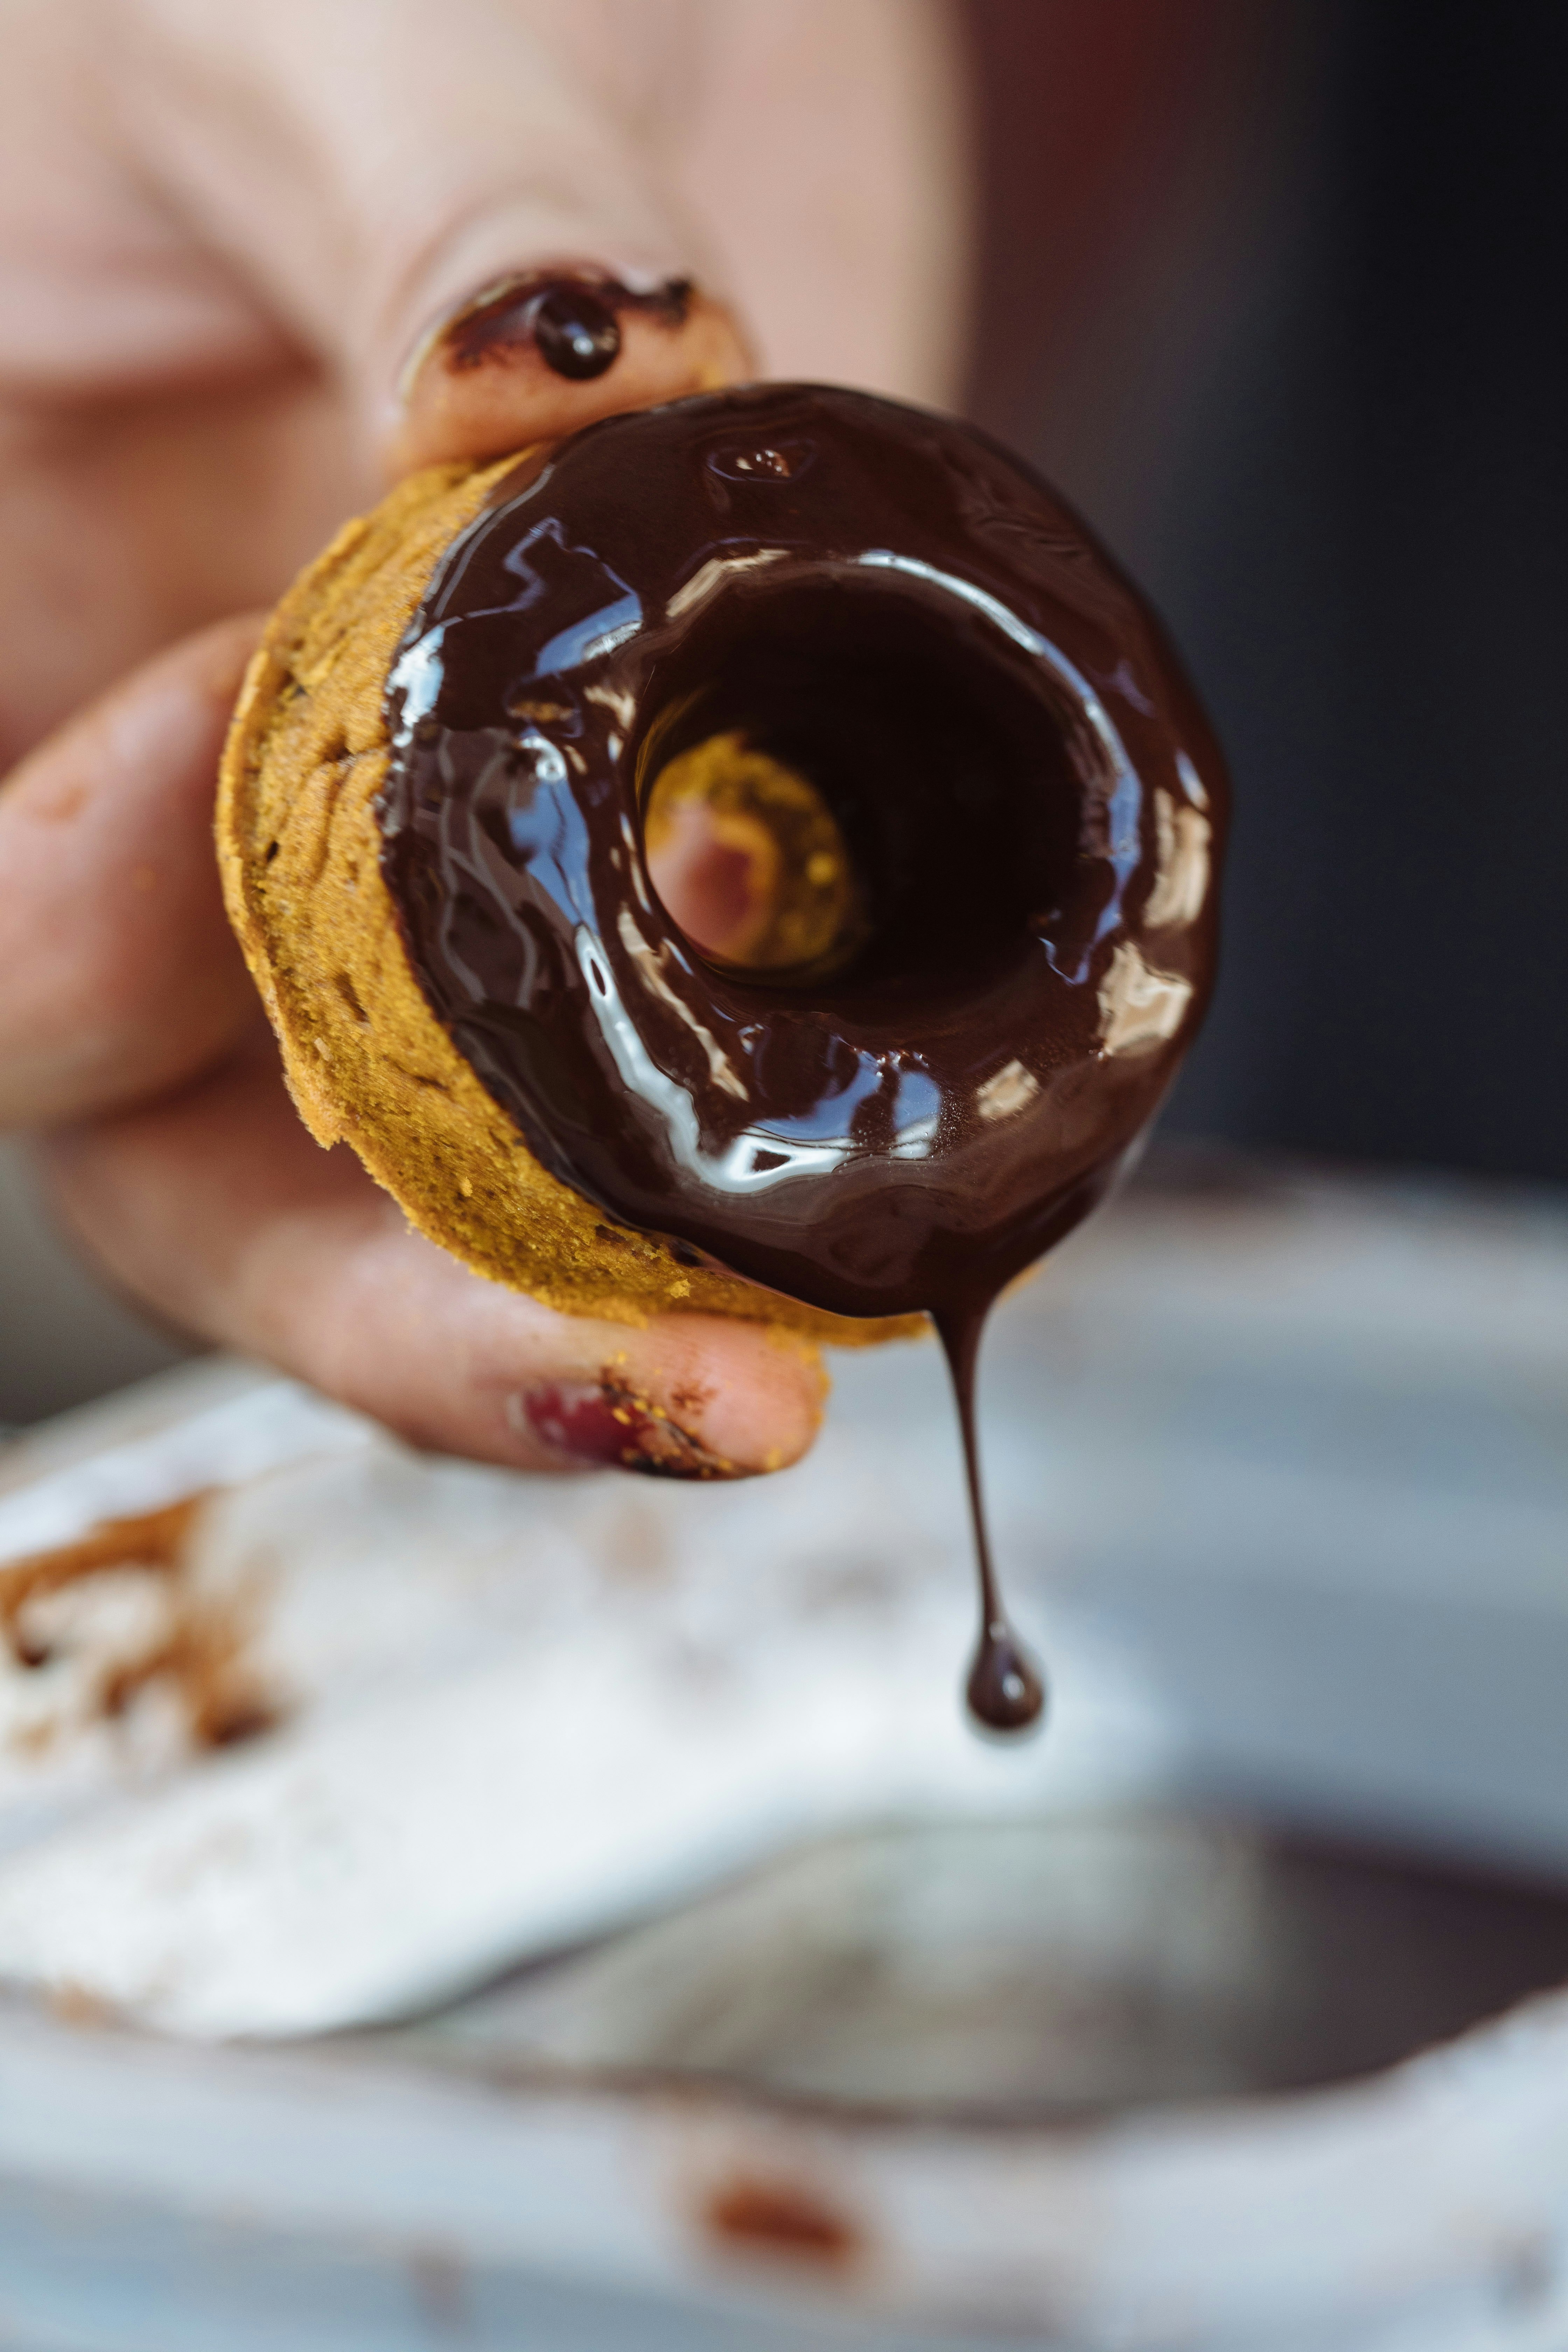 A close-up of a person holding a small, donut-shaped dog treat that has just been dipped in dog-friendly melted chocolate.